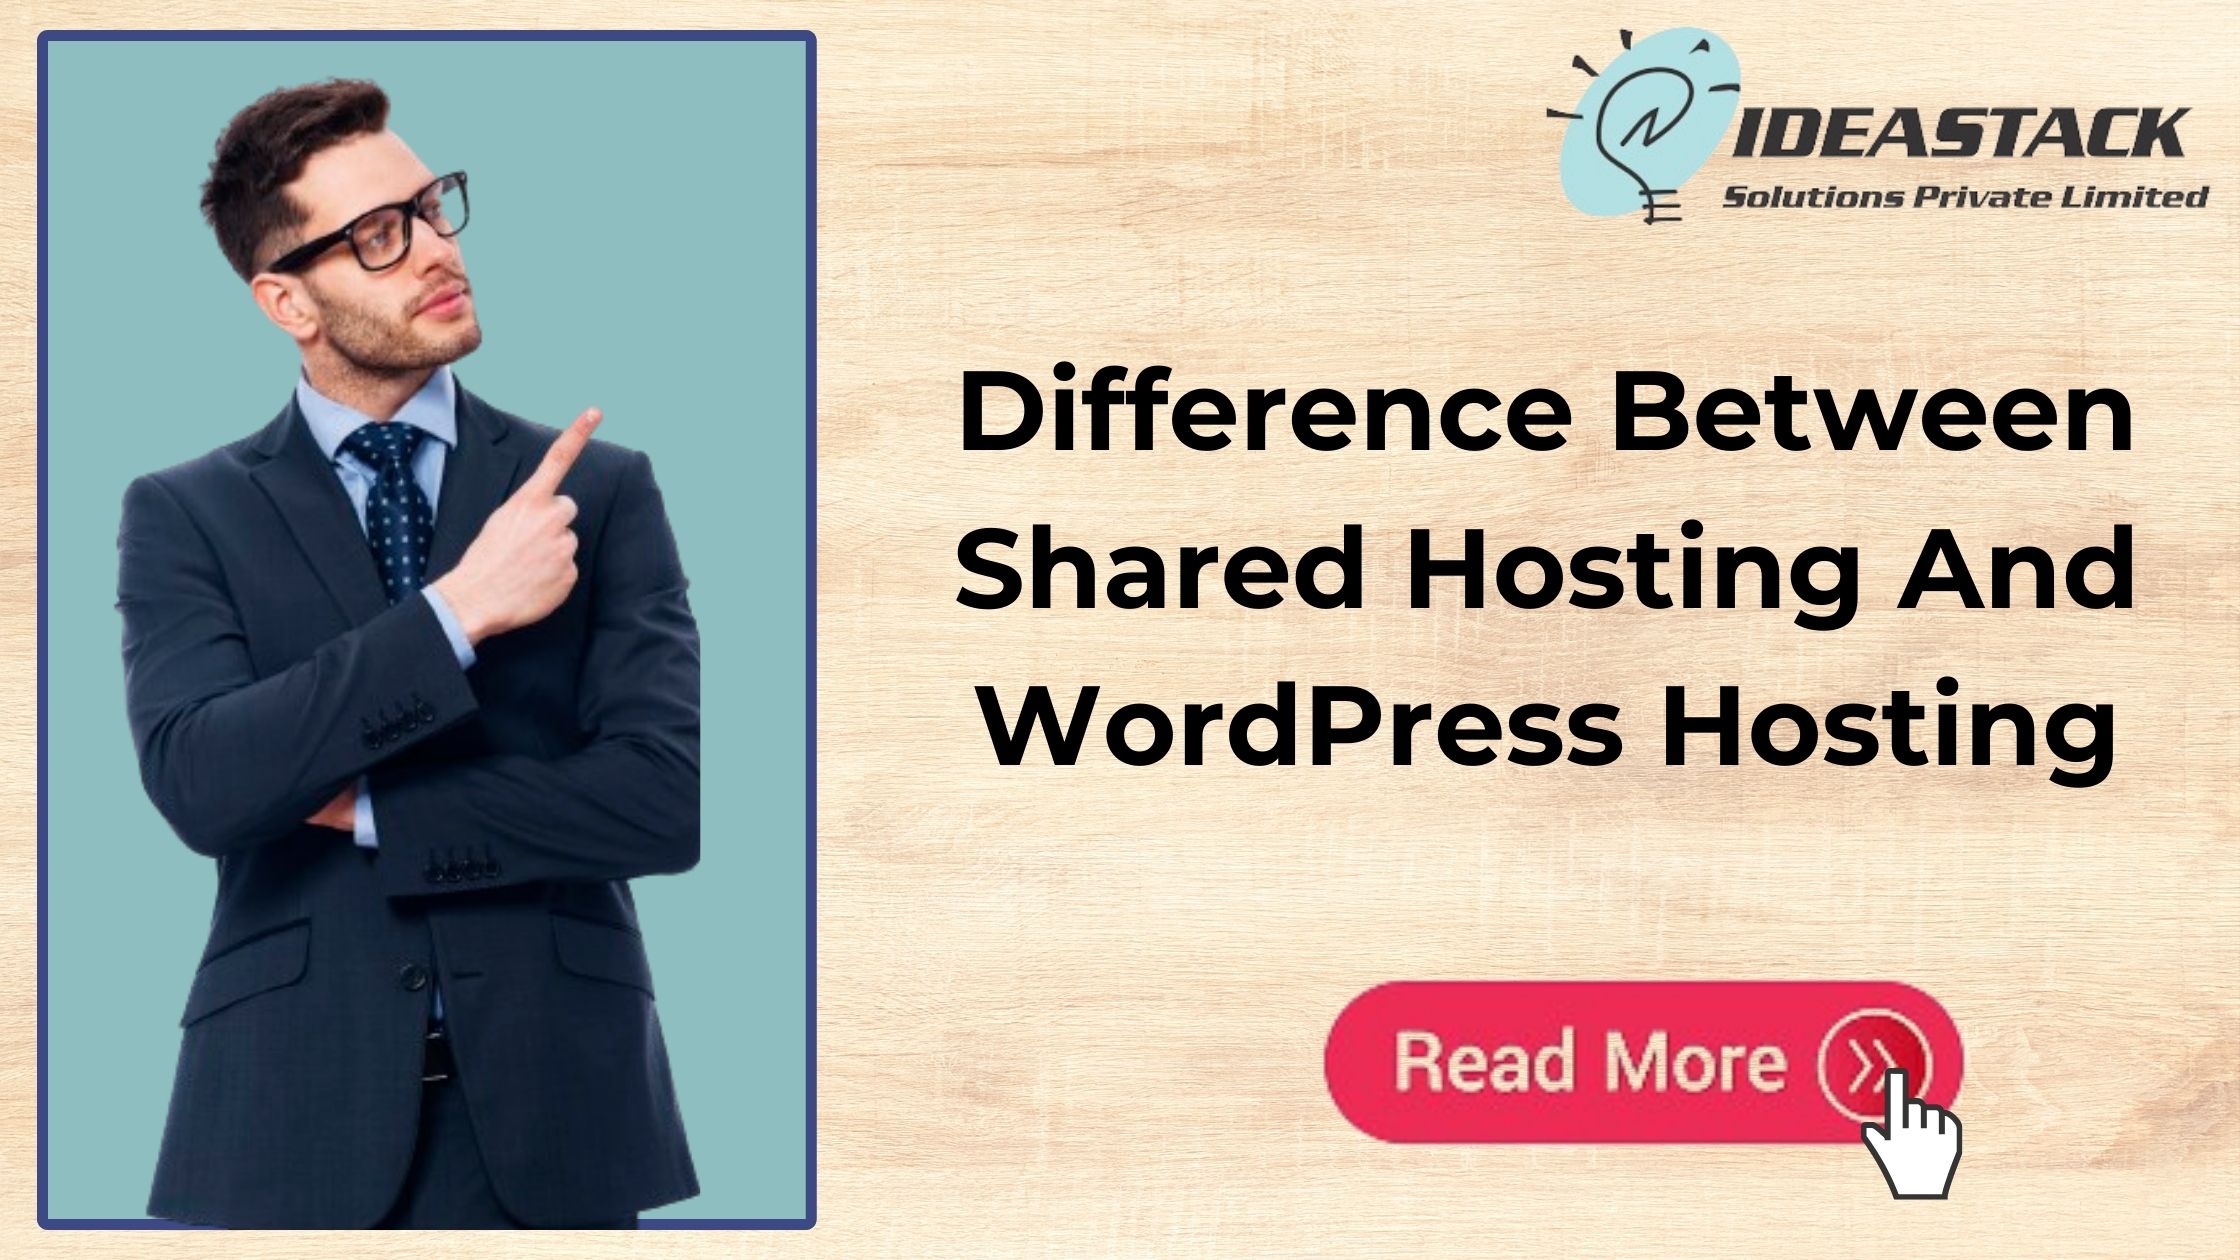 Difference Between Shared Hosting And WordPress Hosting